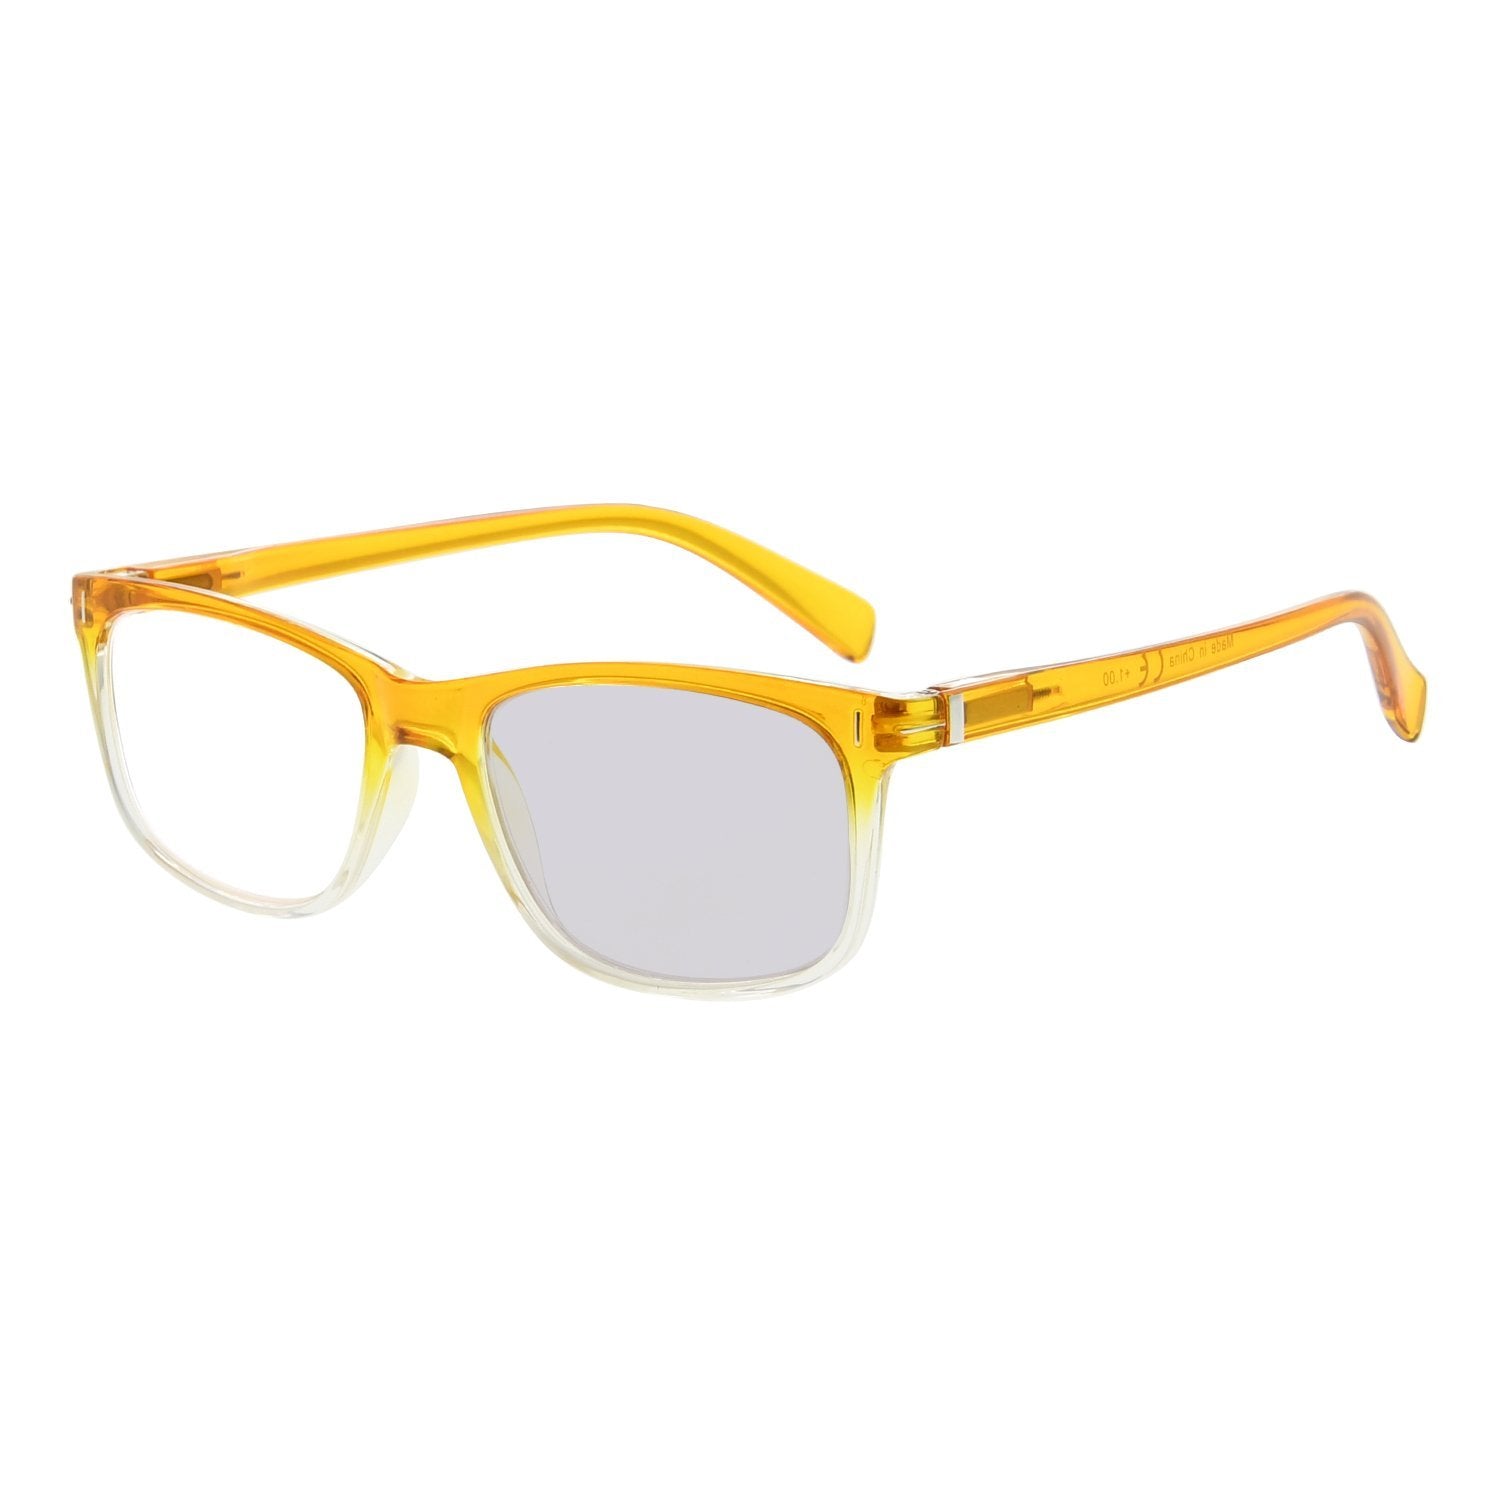 Fashion Transition Photochromic Readers Yellow BSR150